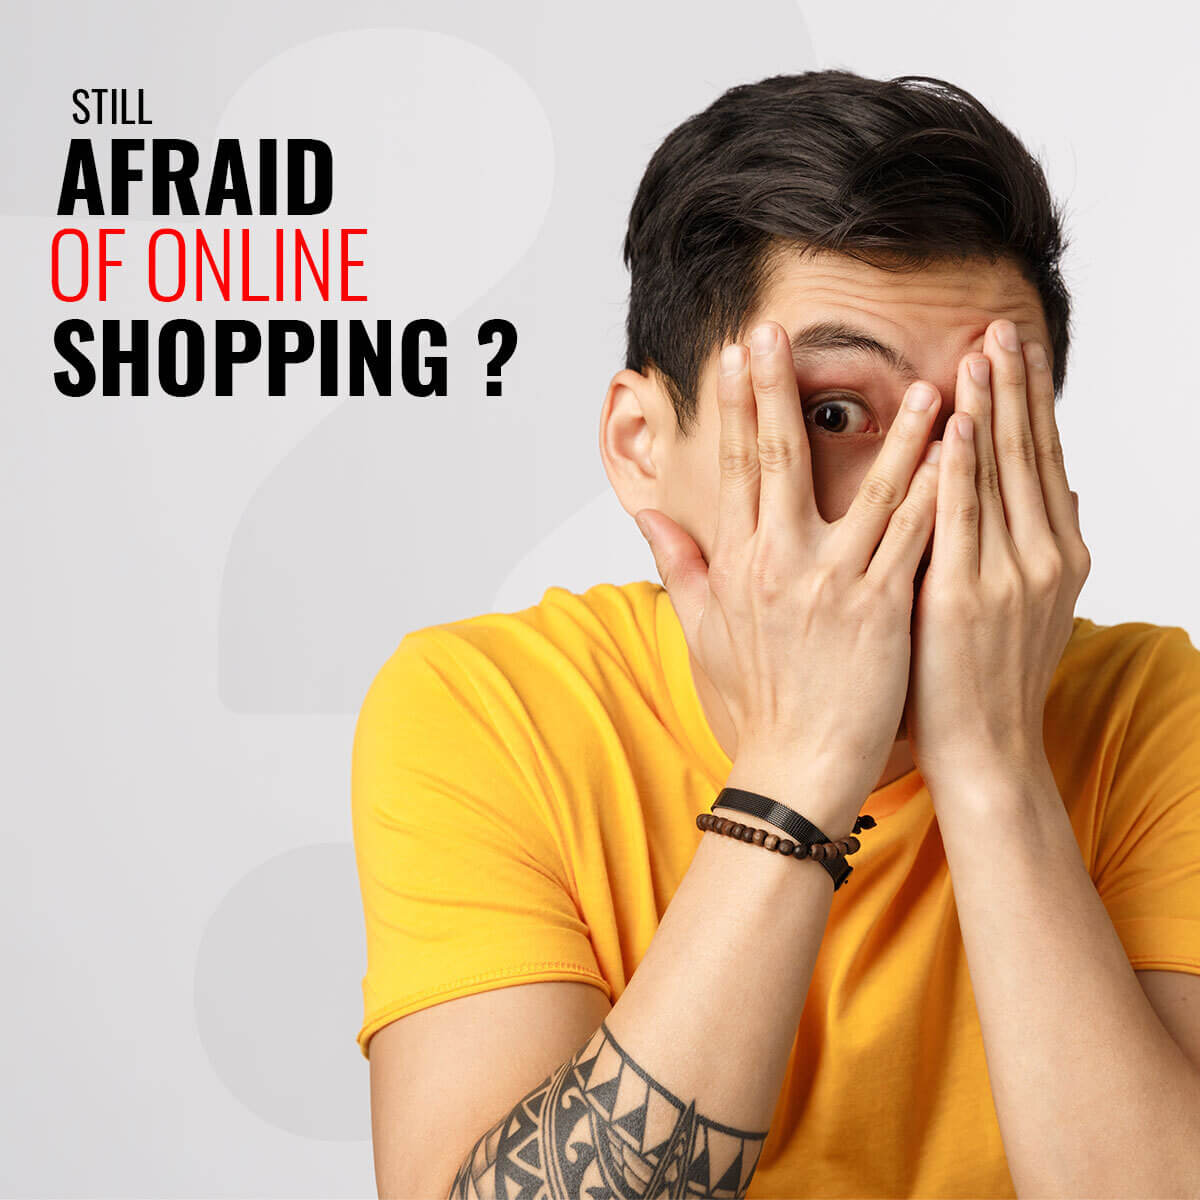 Are You Still Afraid of Online Shopping?